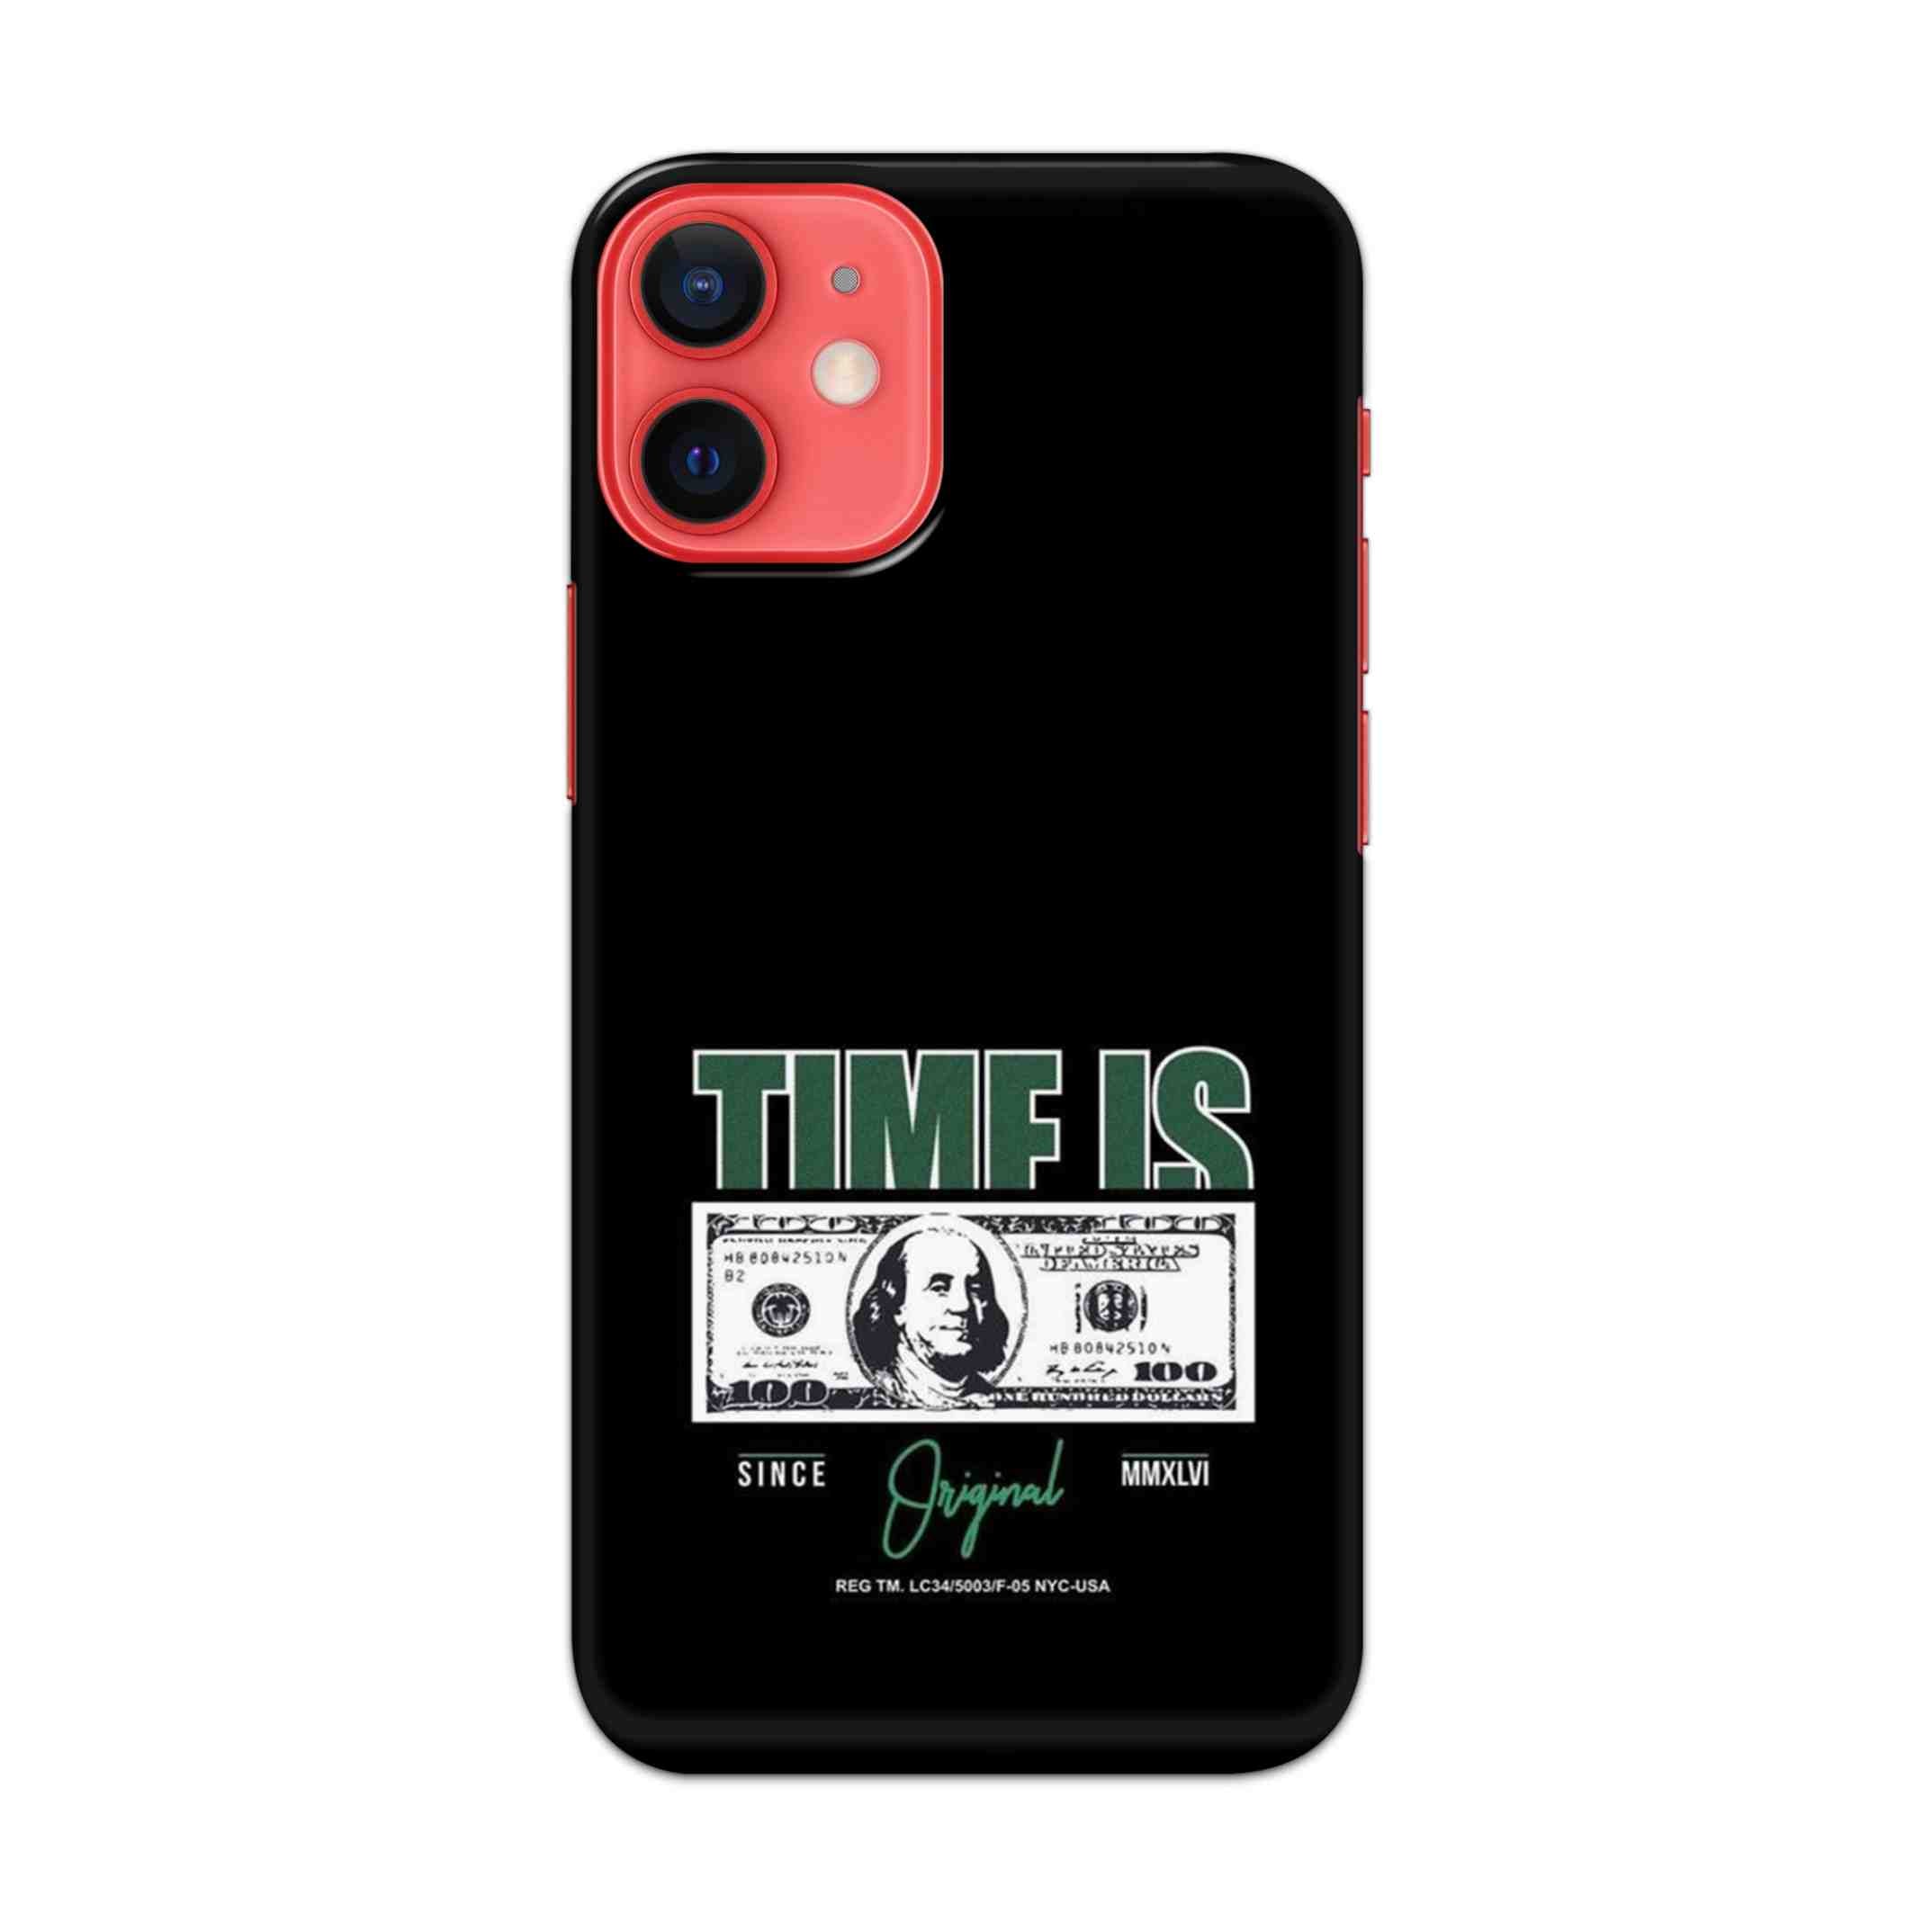 Buy Time Is Money Hard Back Mobile Phone Case/Cover For Apple iPhone 12 mini Online